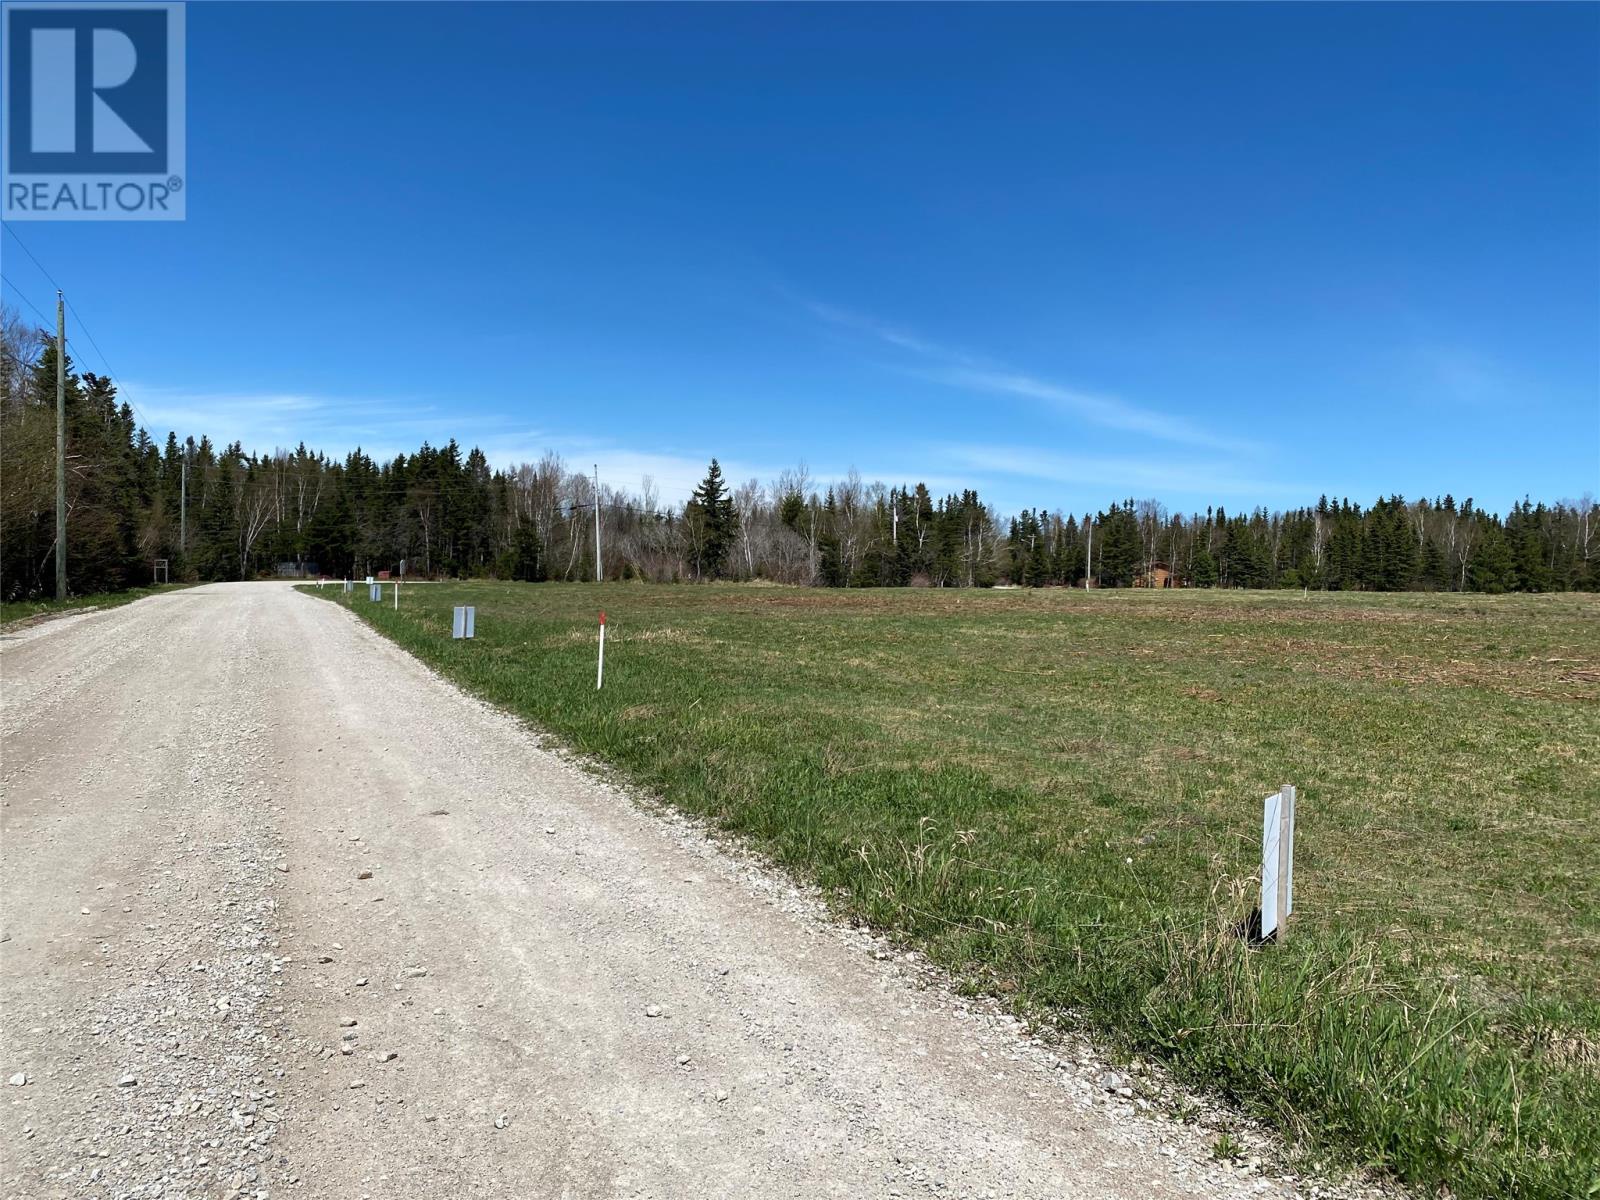 LOT#1 UPPER TRANQUIL WATERS Road located in REIDVILLE,
                  Newfoundland and Labrador image #0